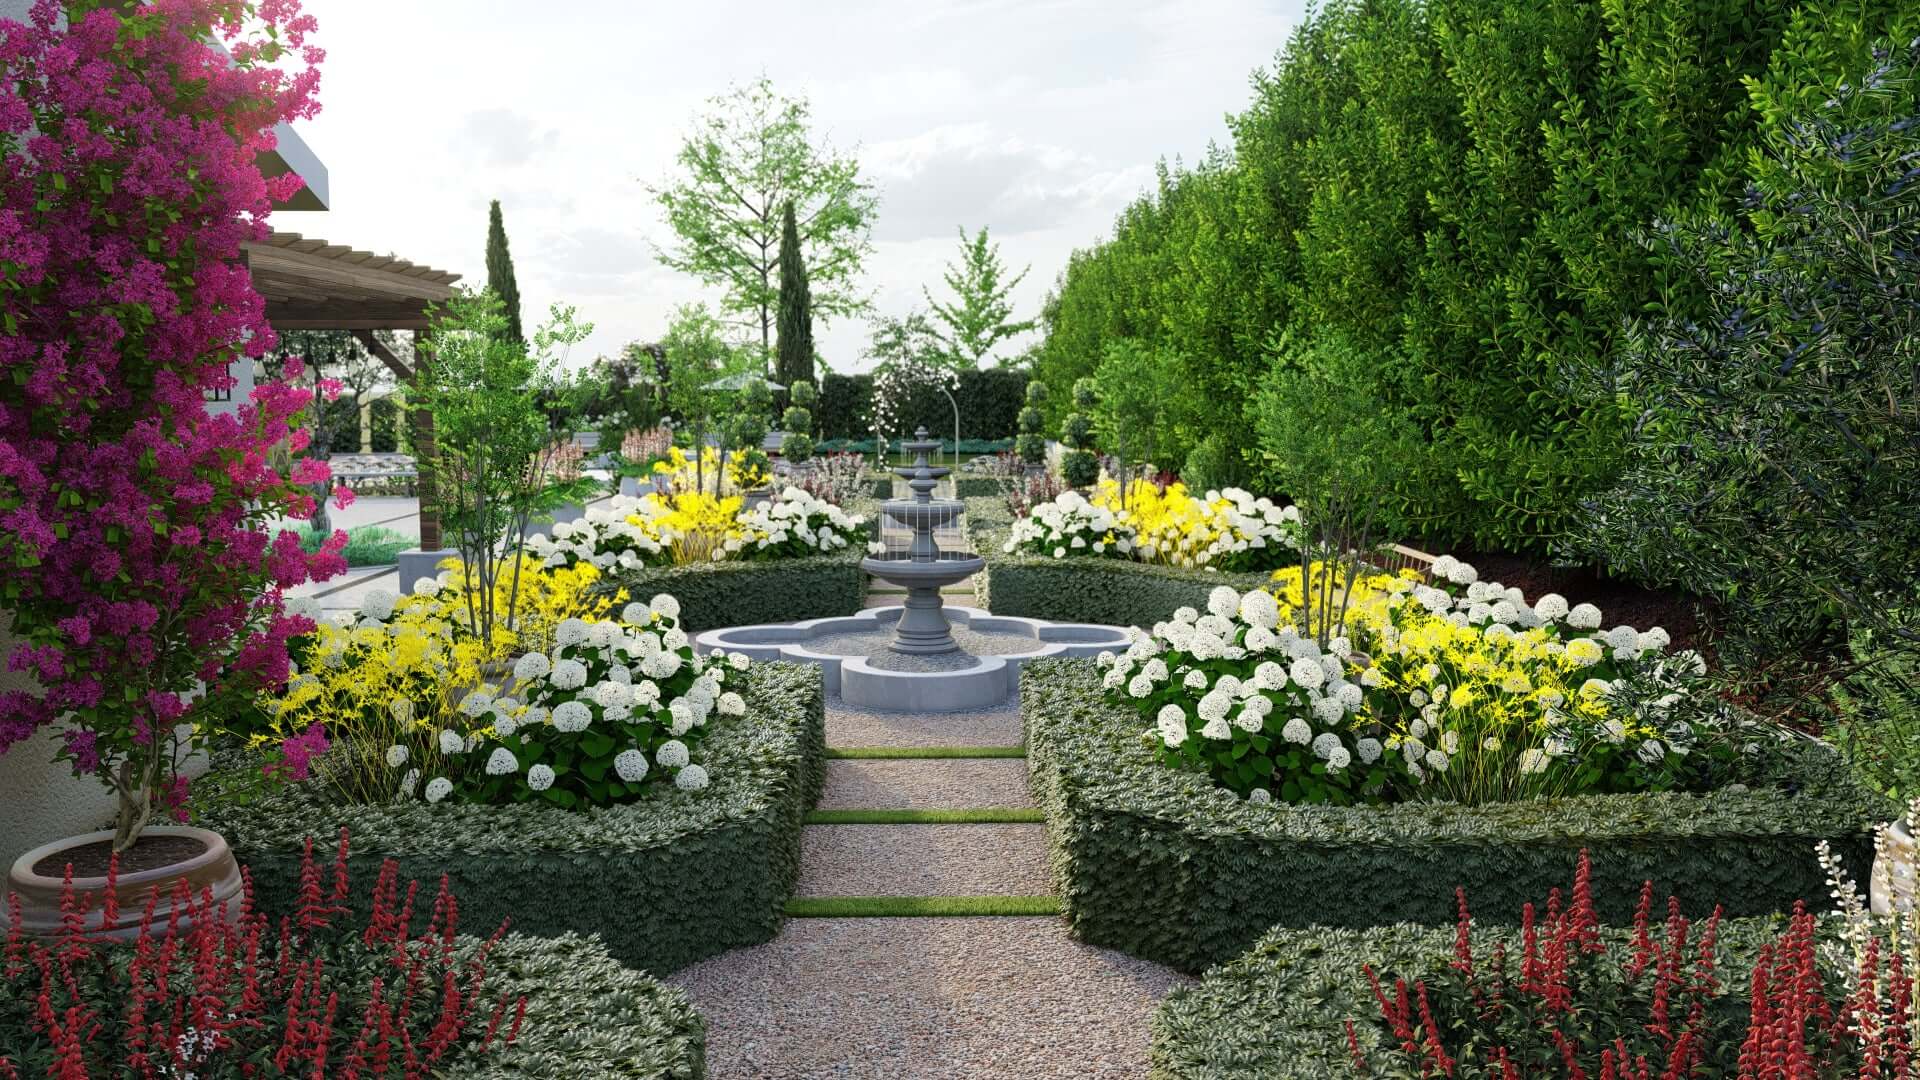 a formal garden with clipped hedging surrounding flower beds and a large multi-tiered fountain at the center